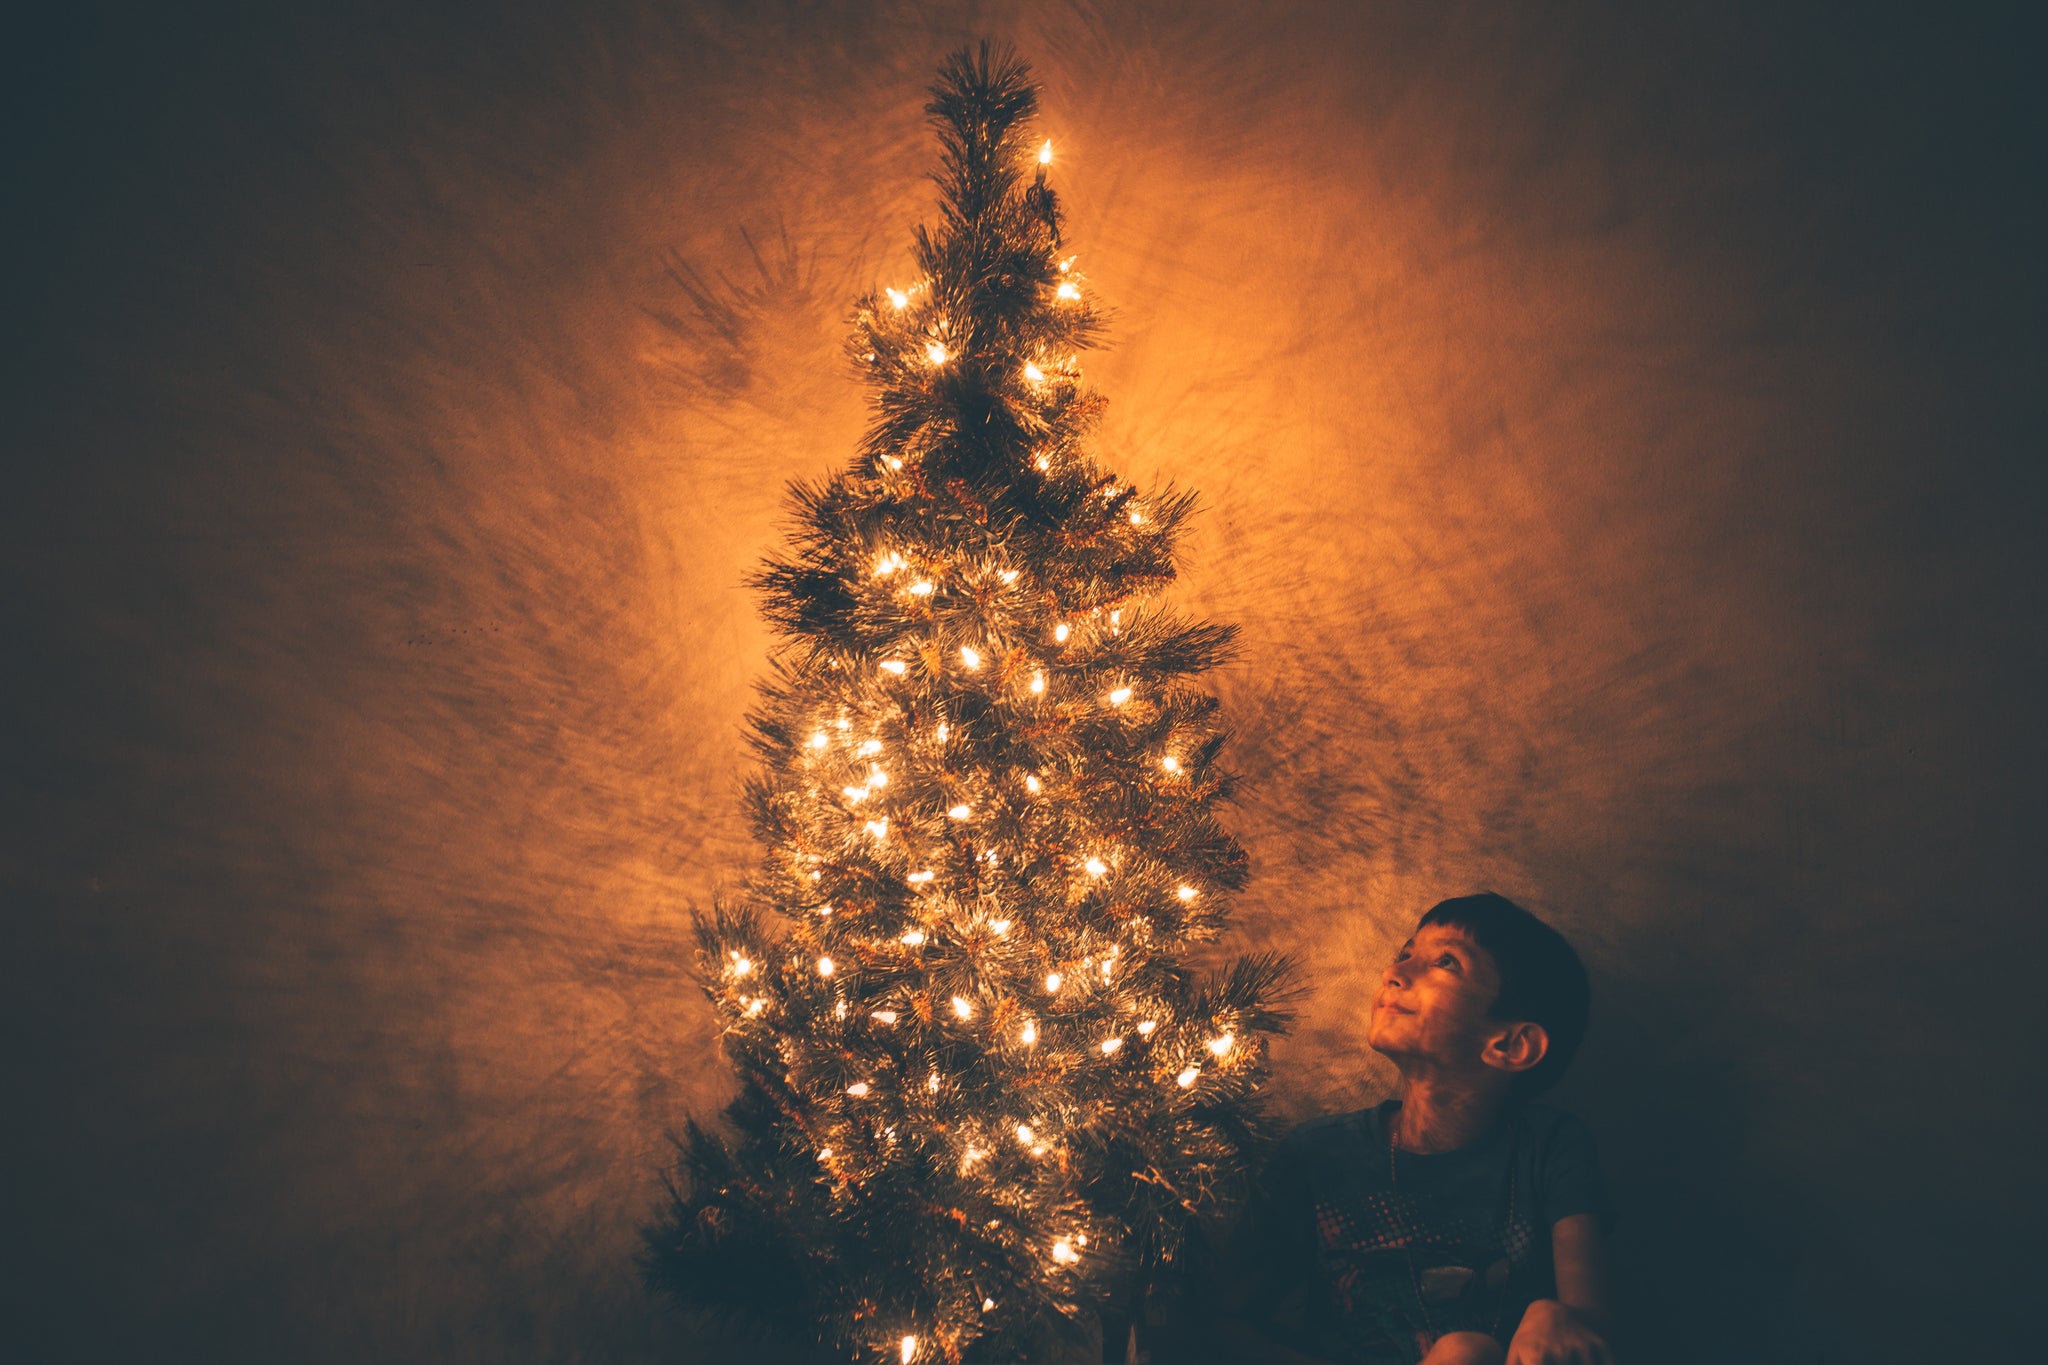 The Human Christmas Tree: When You're "Too" Something for Everyone